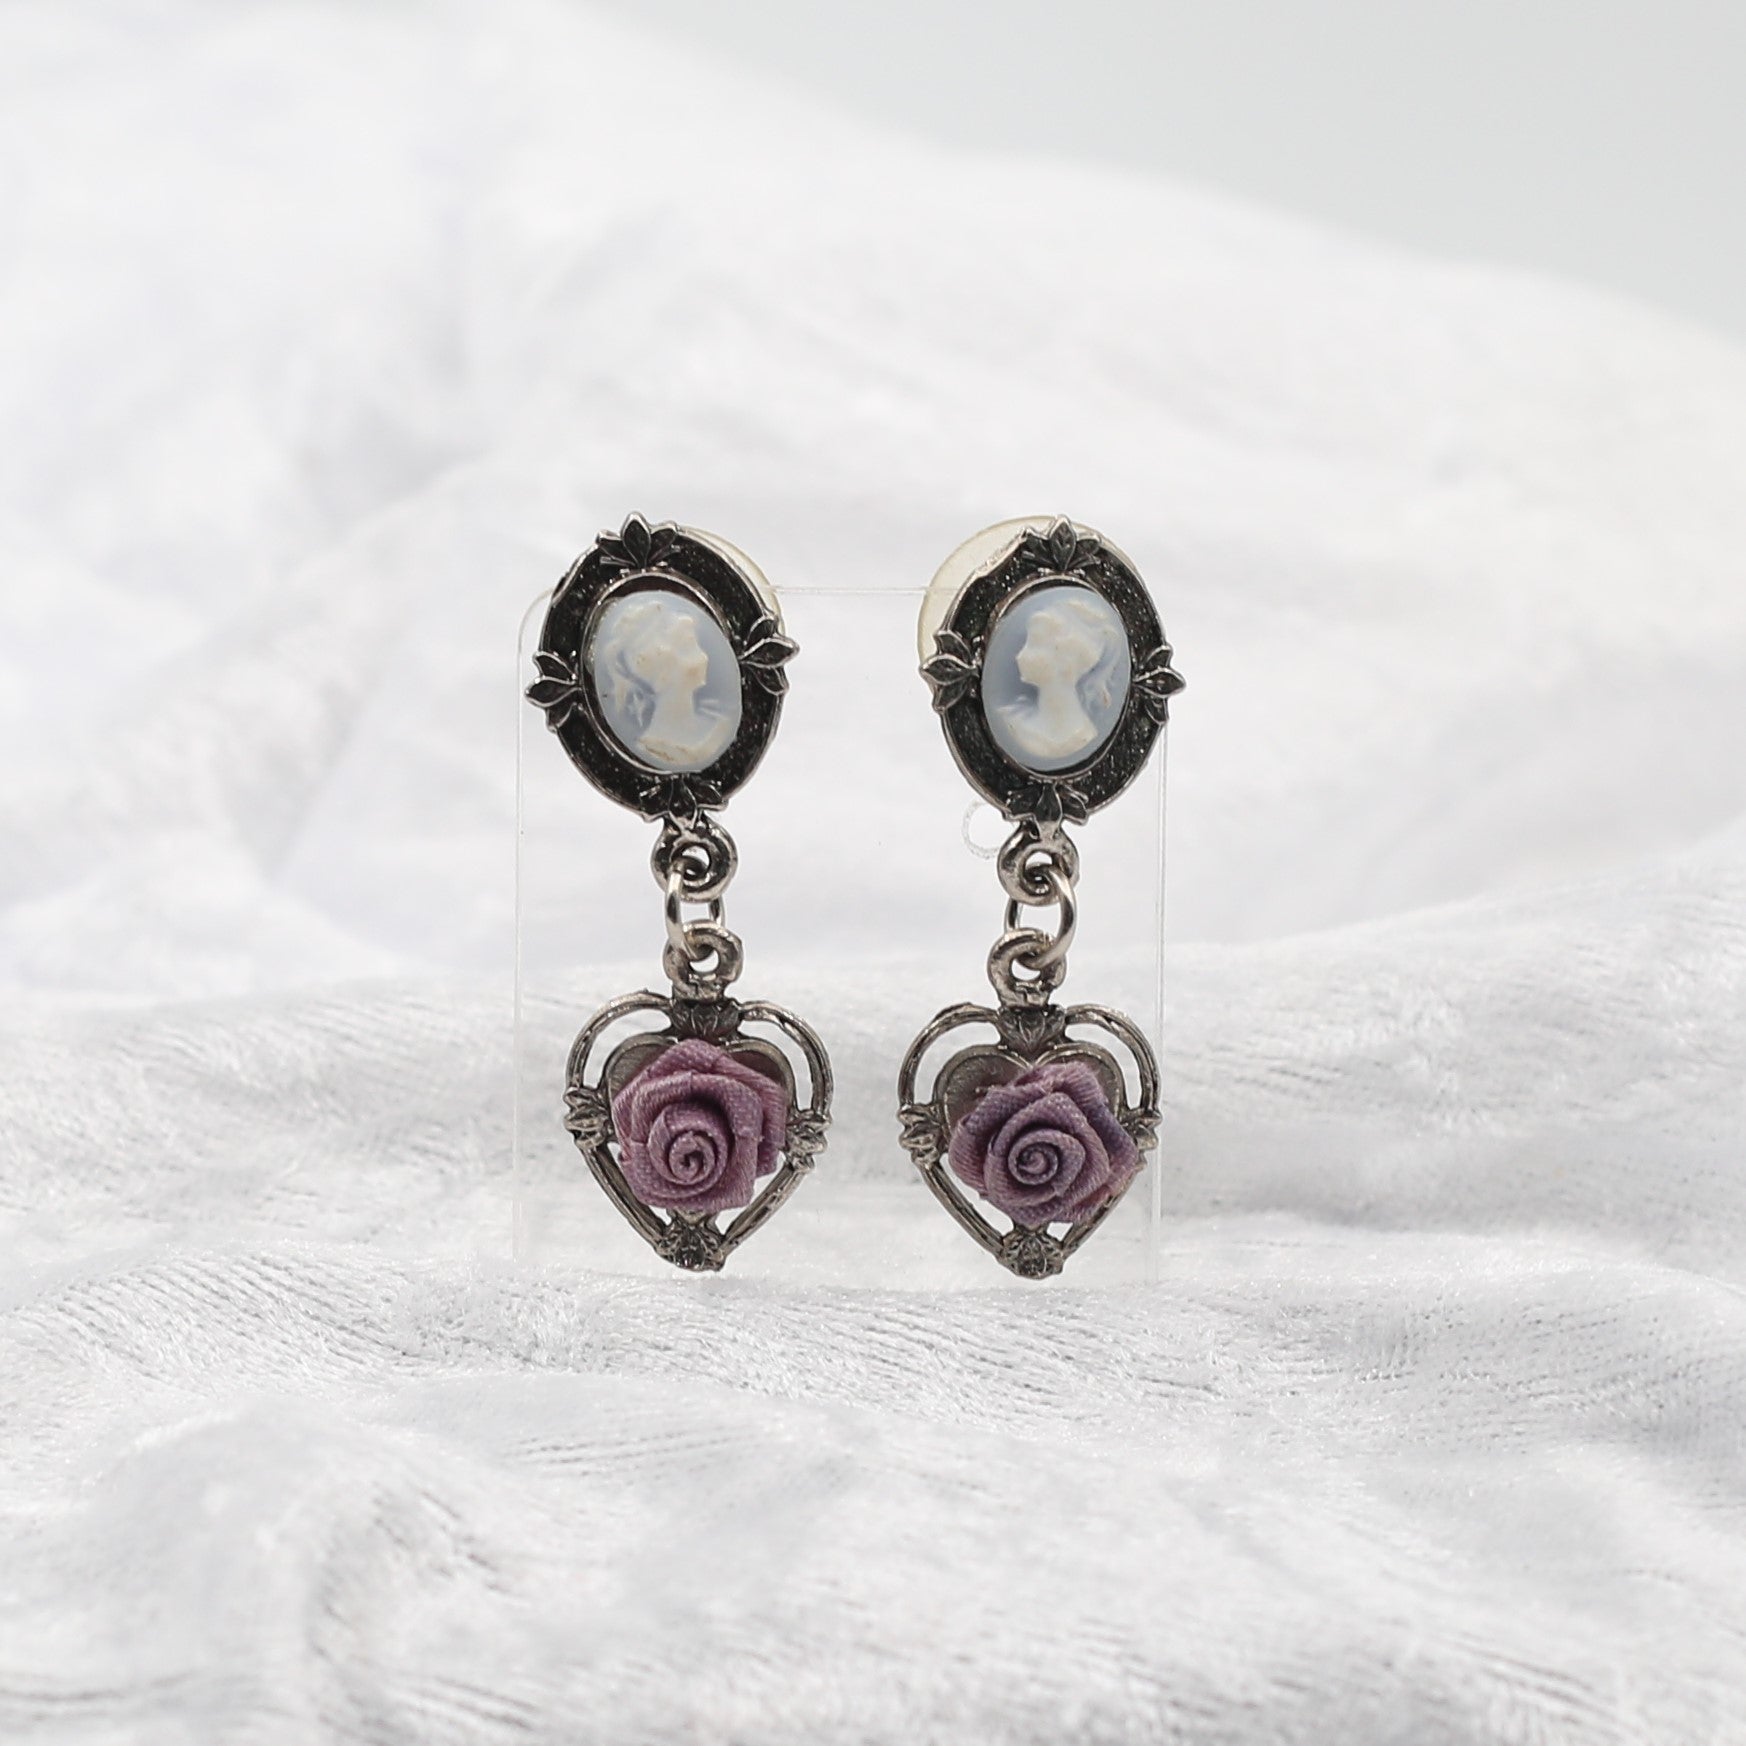 Blue Cameo with purple dangling earrings